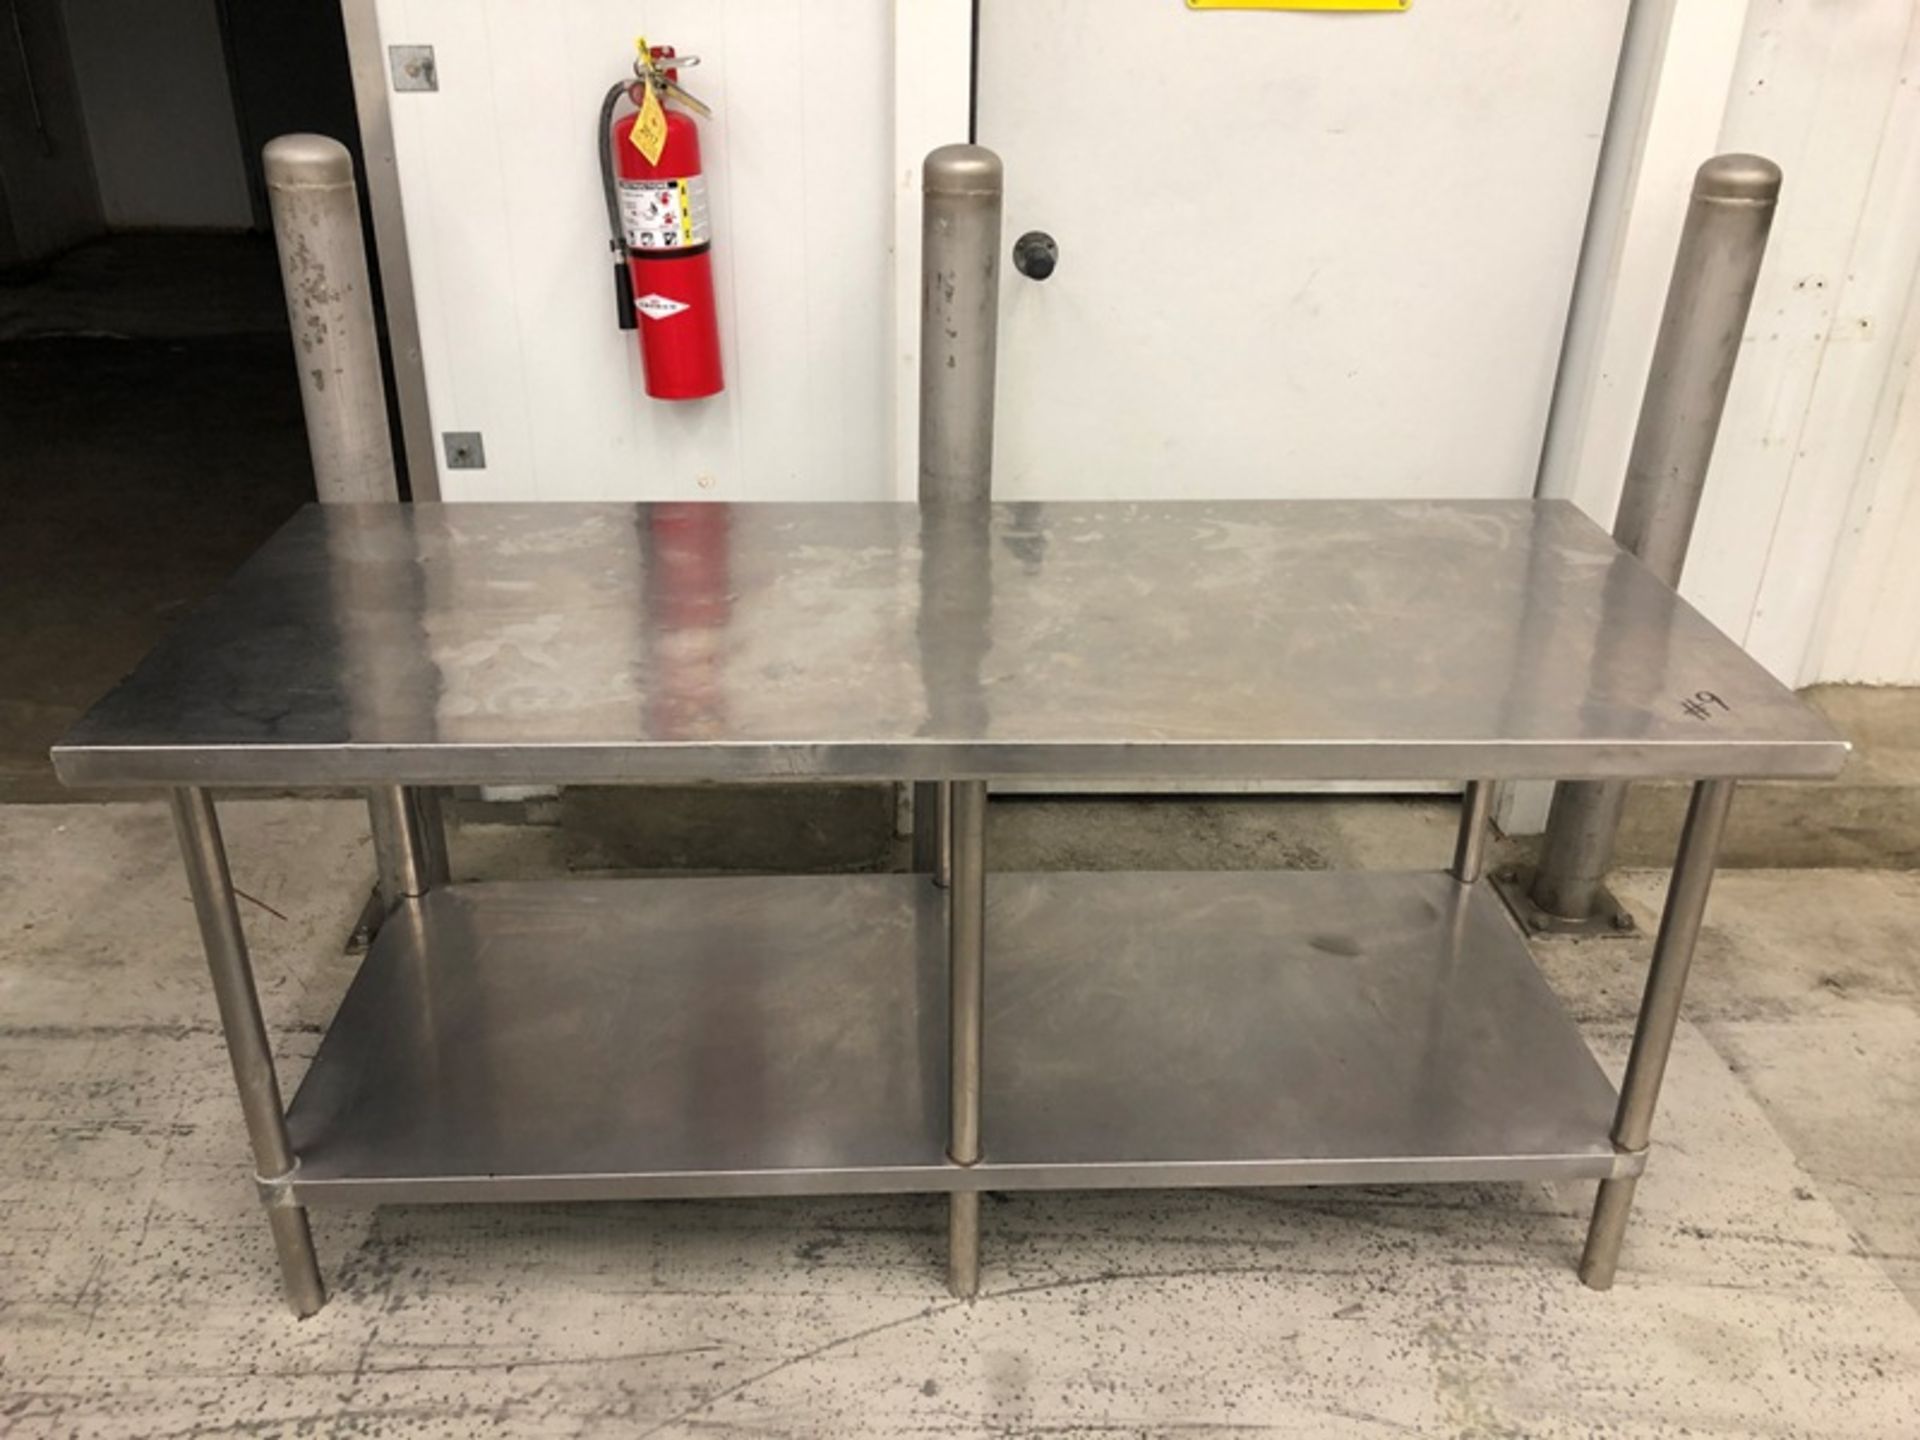 Table, 6'x30"x33", stainless steel construction (Located in Bridgeview, IL) (Removal Date Is April